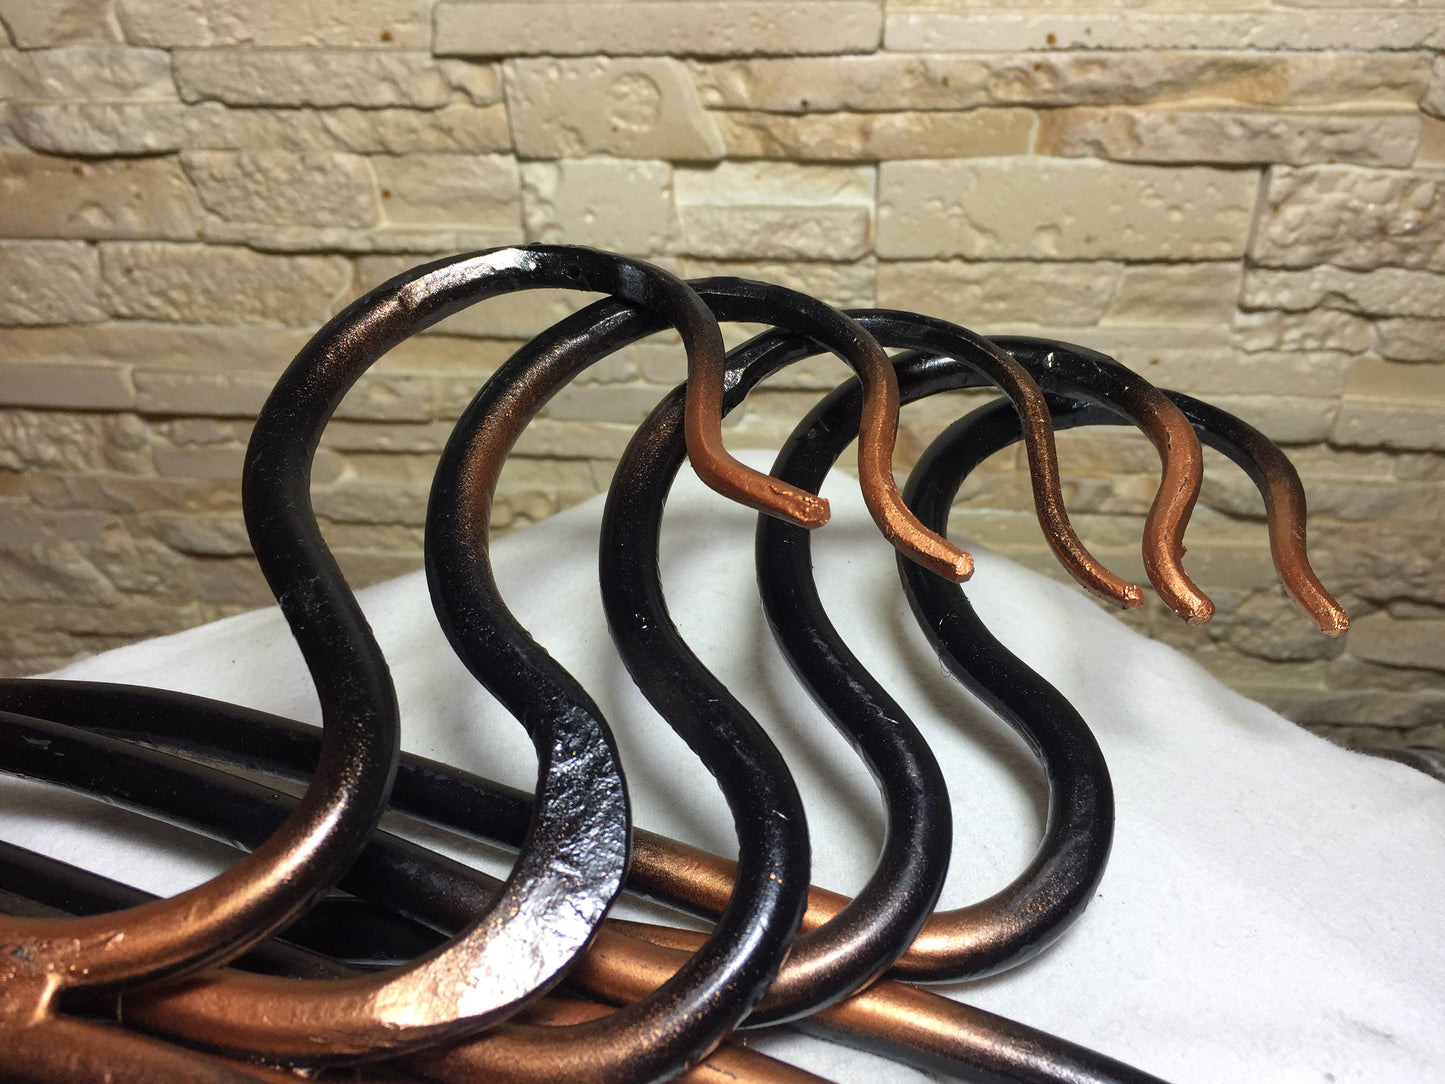 Set of 3 hangers, hand forged